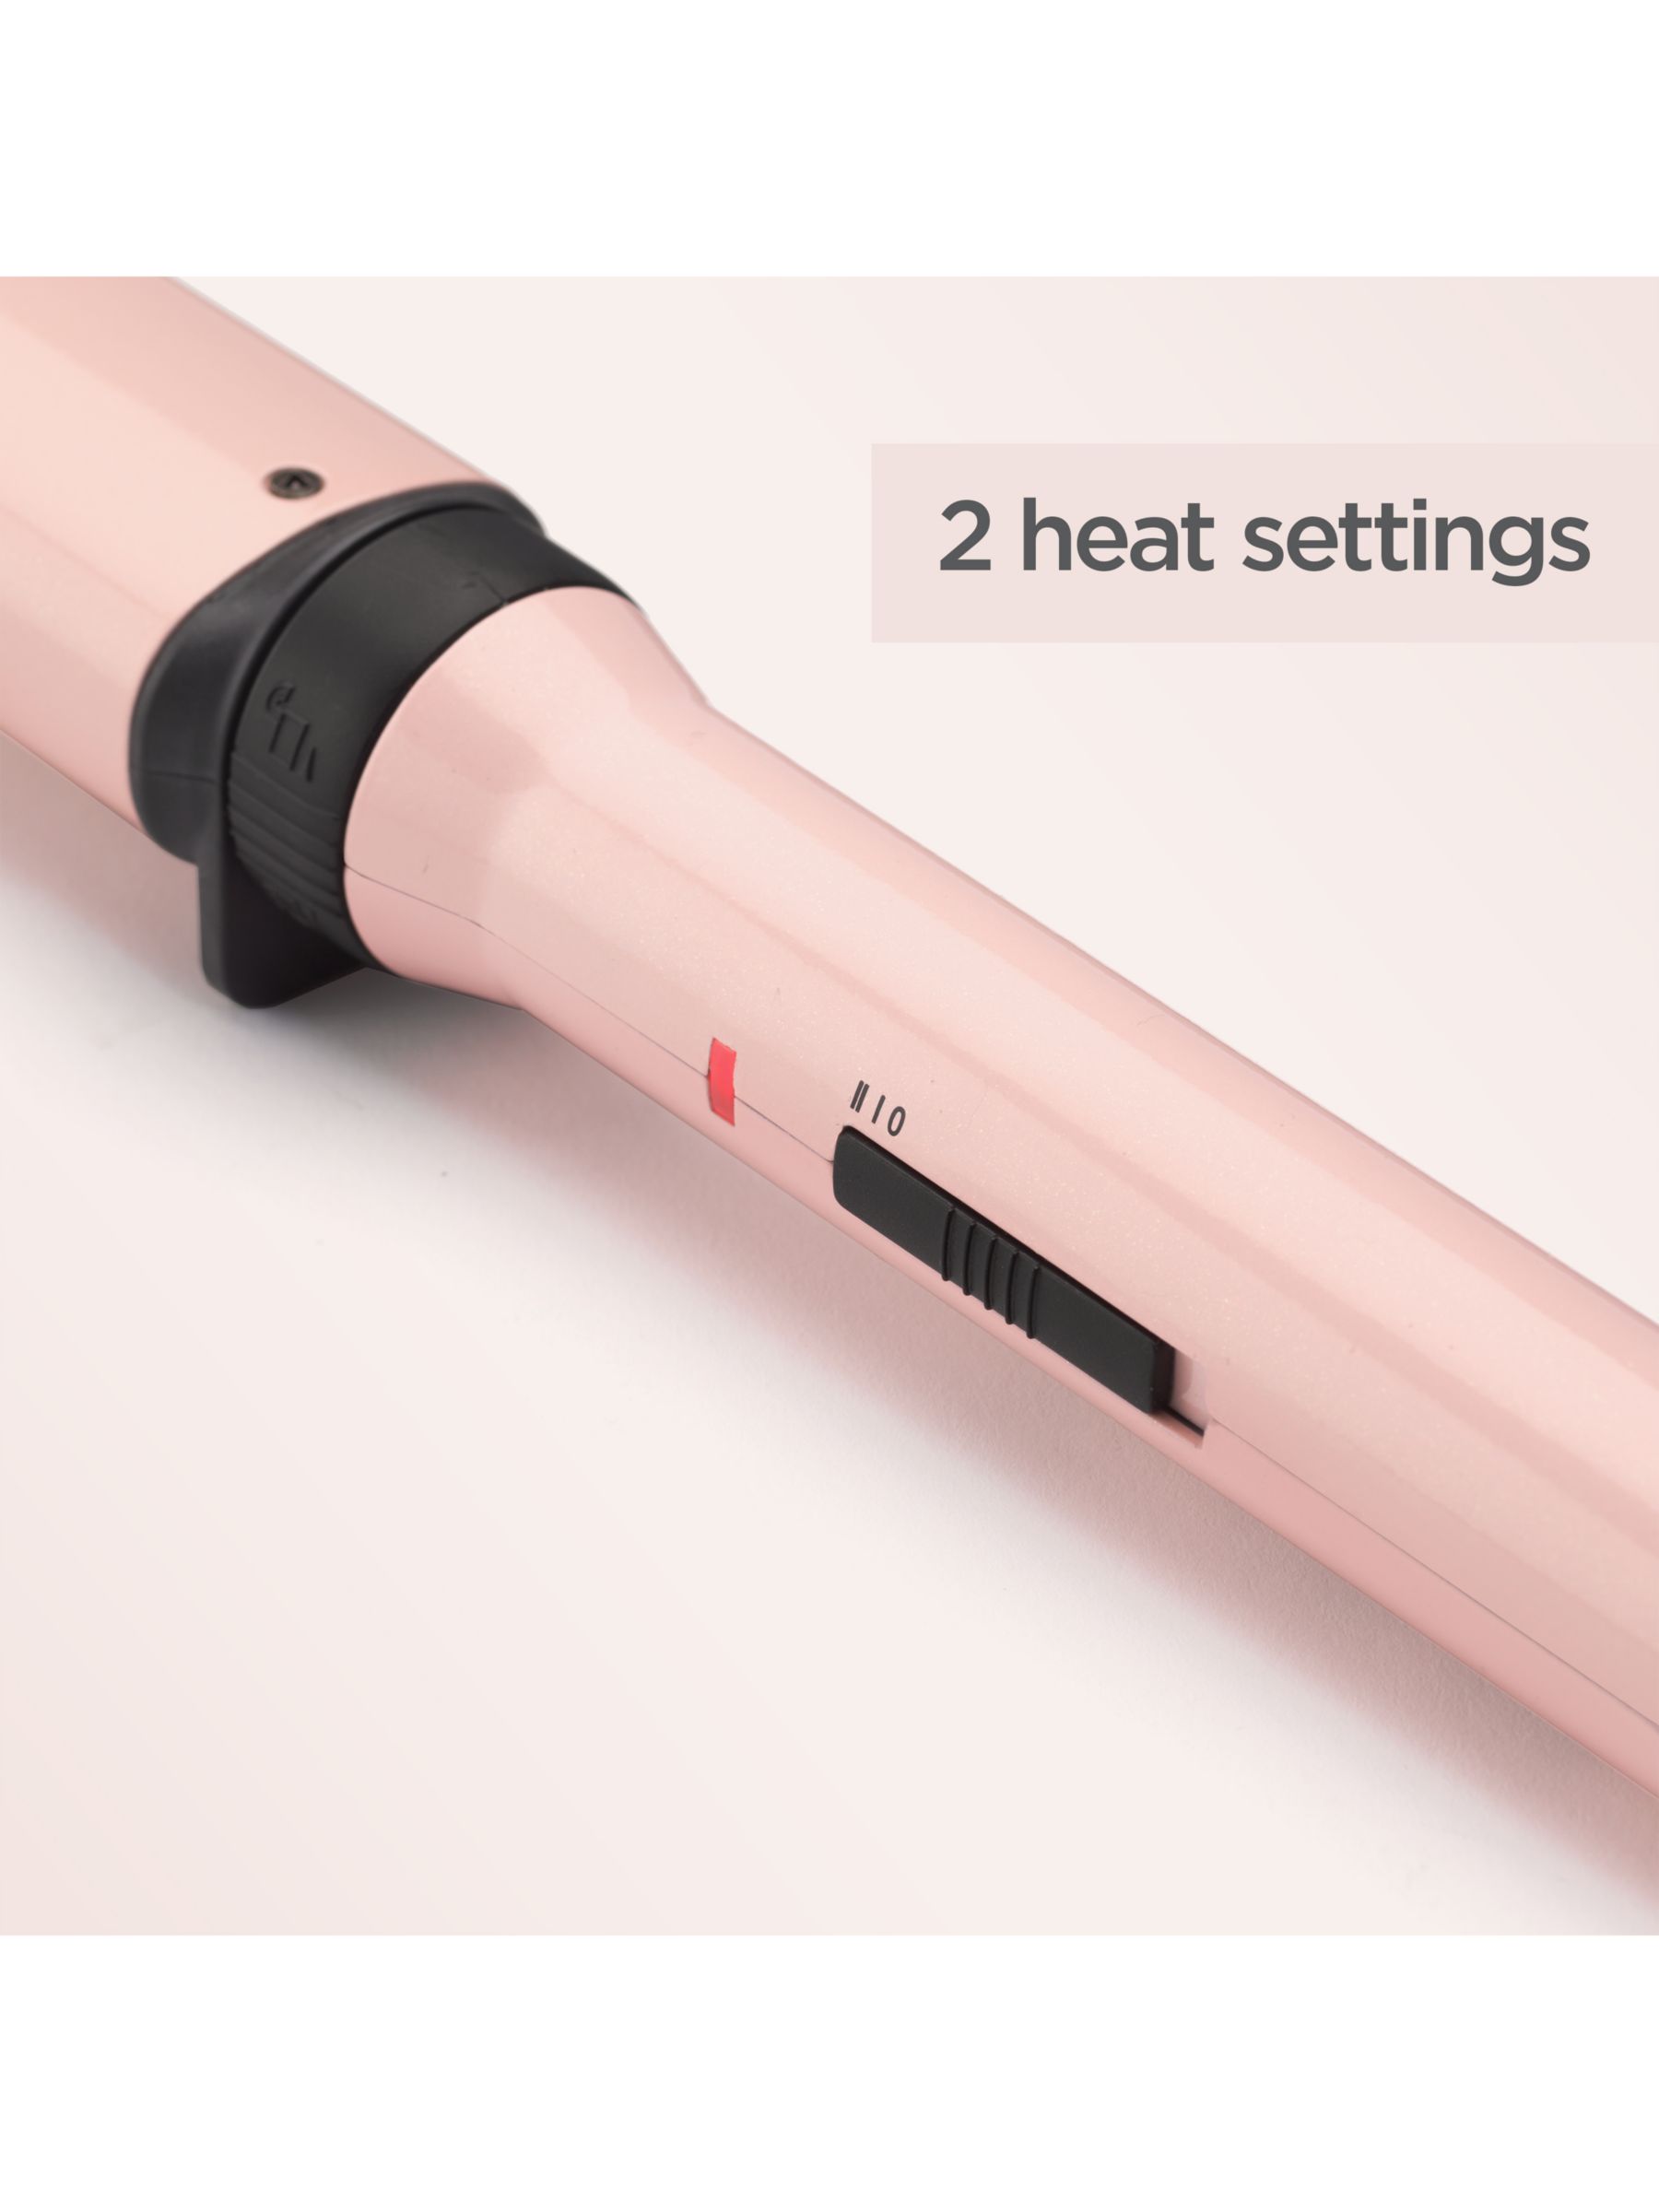 BaByliss Curl & Wave Trio Hair Styler, Pink/Black